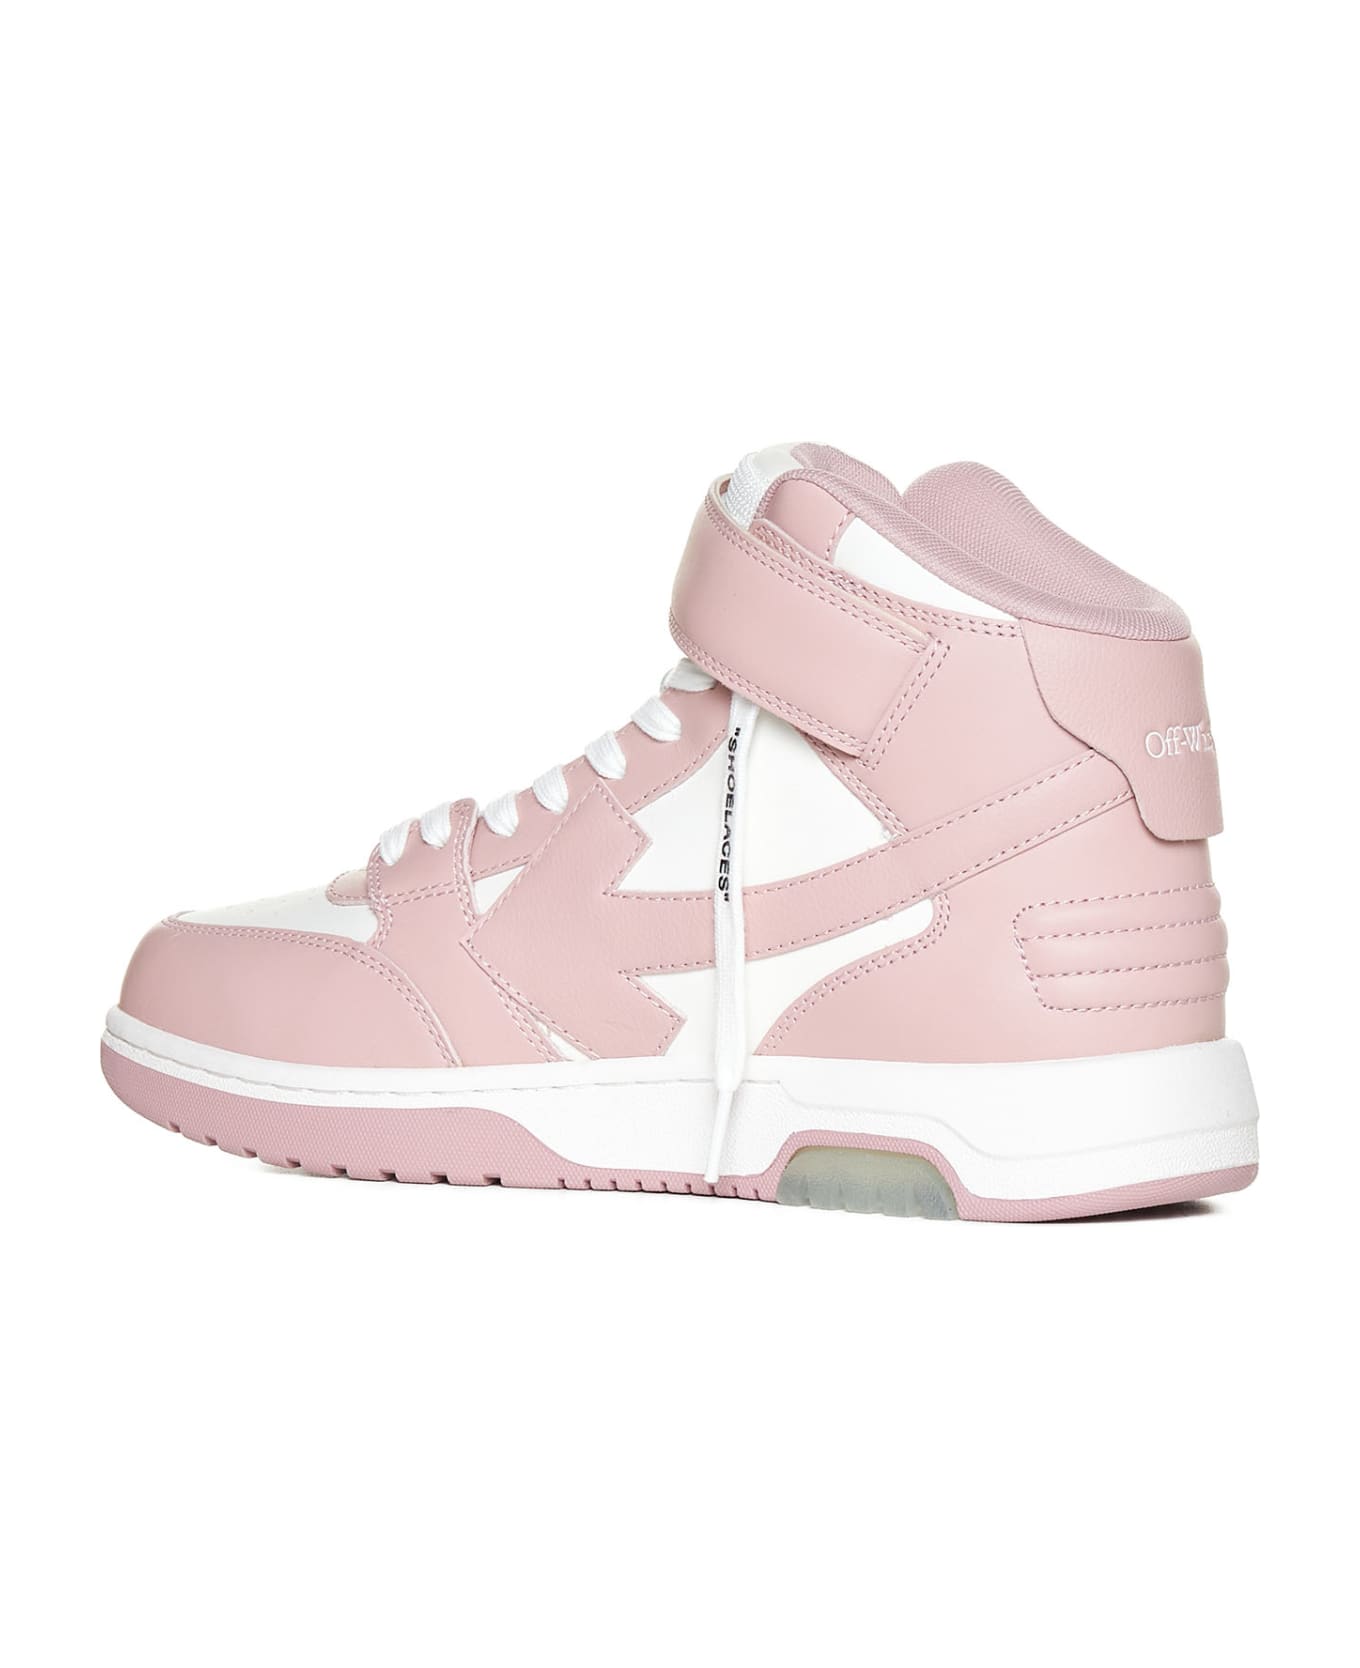 Off-White Sneakers - White pink